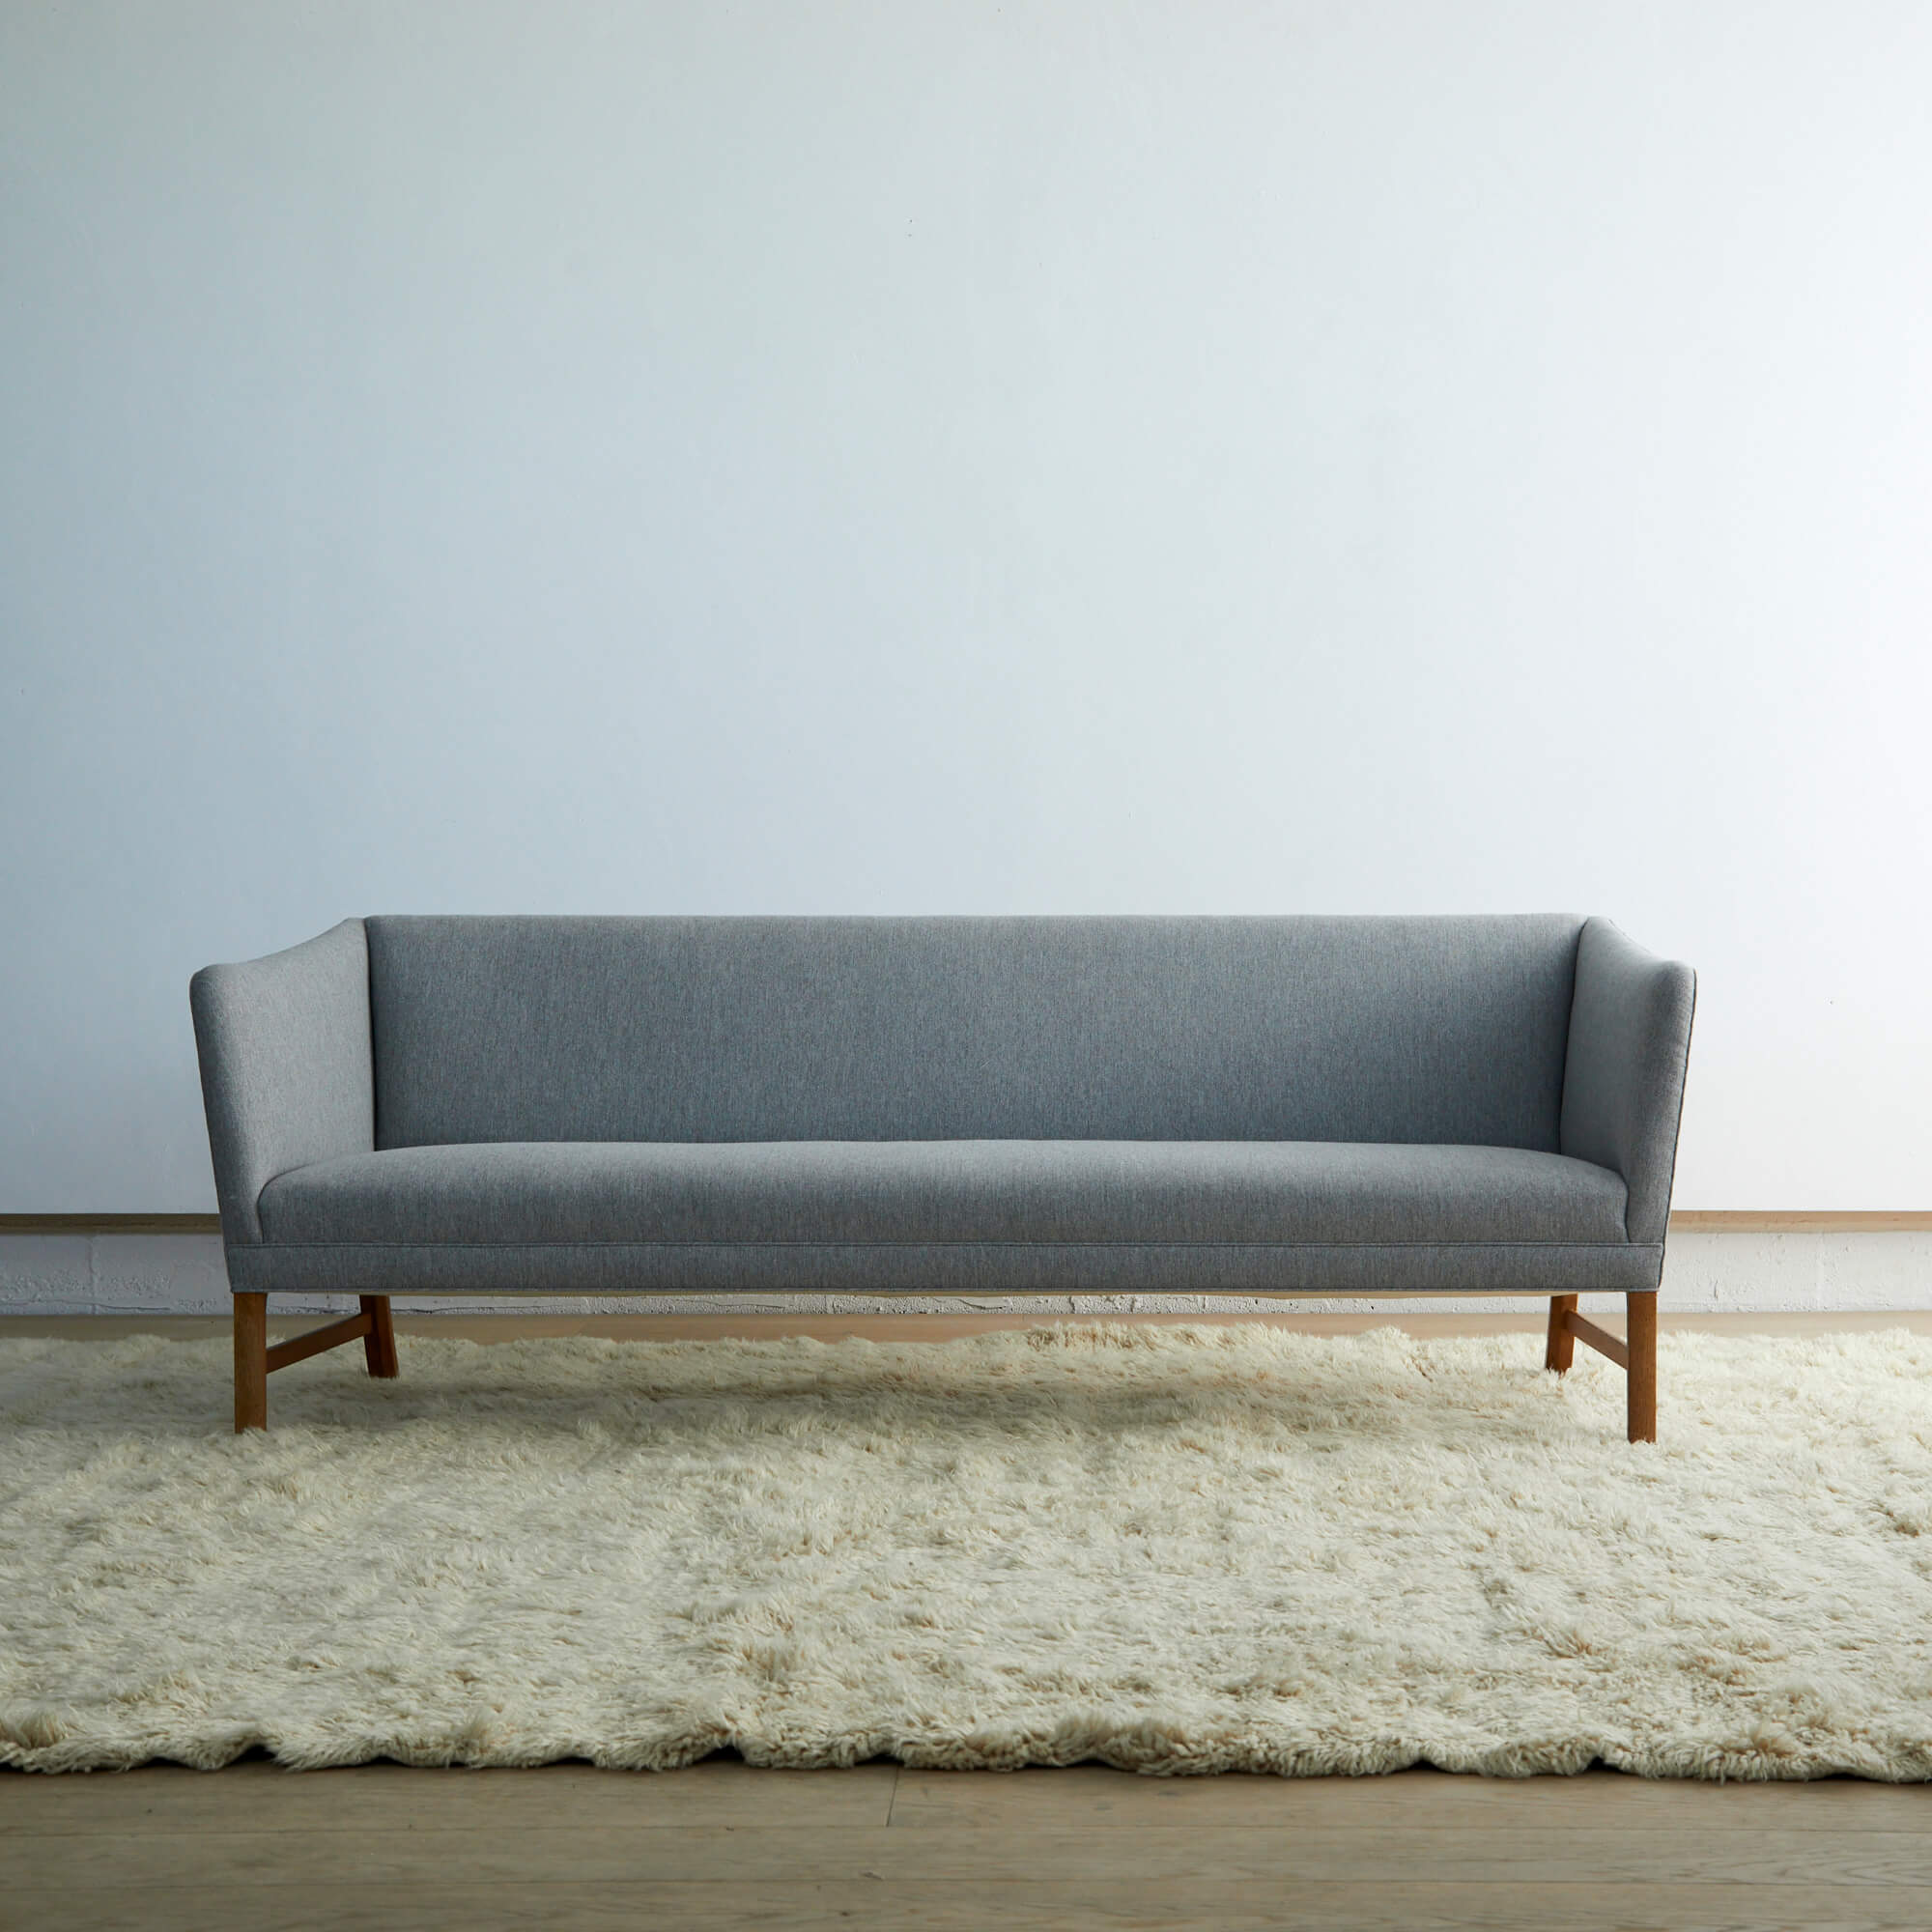 Three-Seat Sofa with Oak Legs by Ole Wanscher